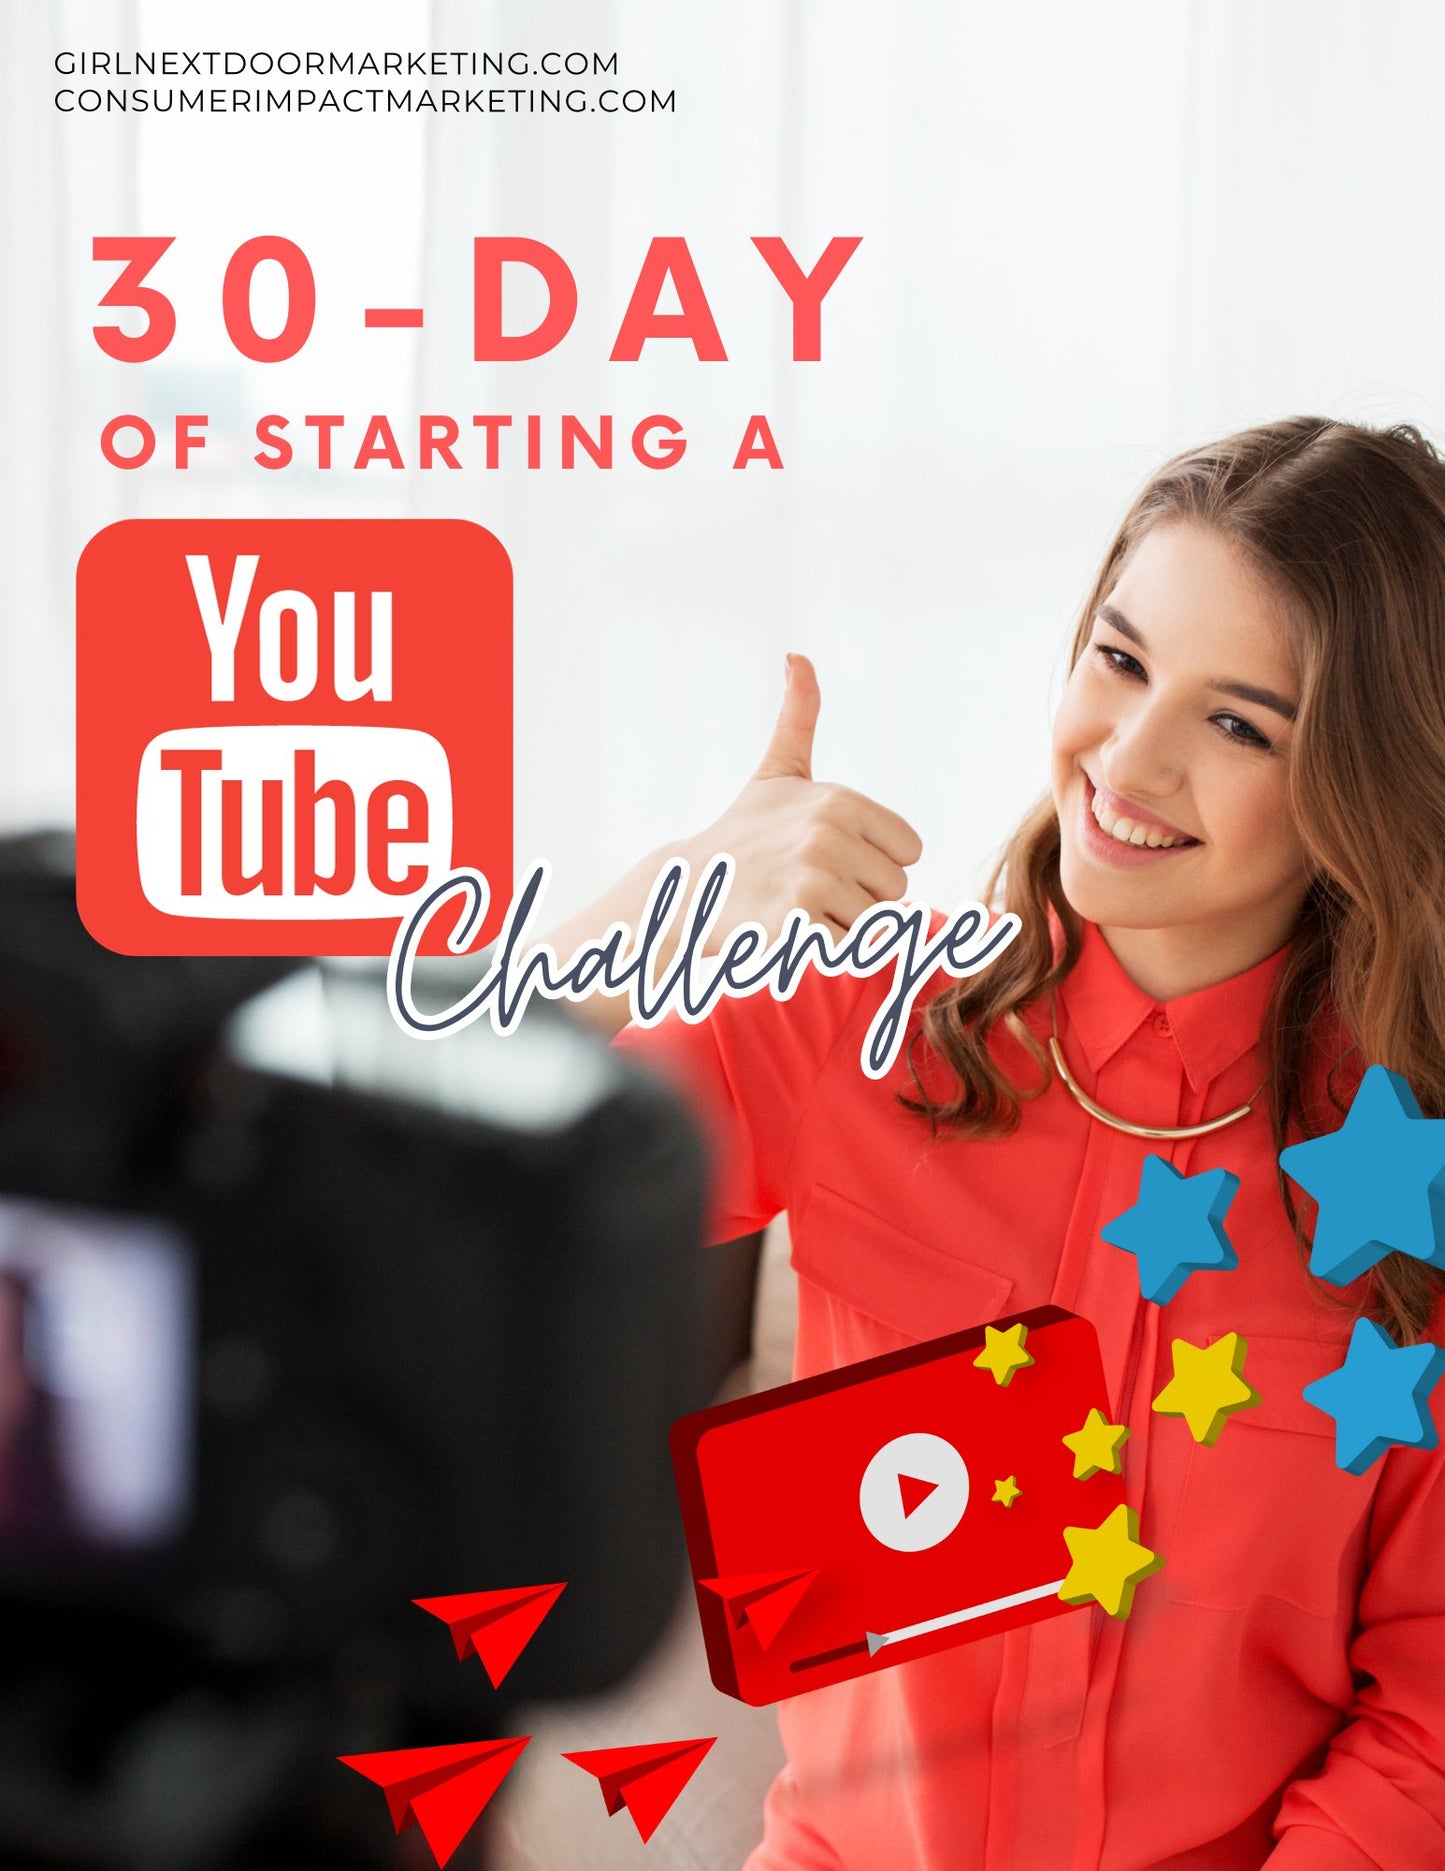 30 Day Of Starting a YouTube Challenge - 41 Pages - Girls Next Door Marketplace